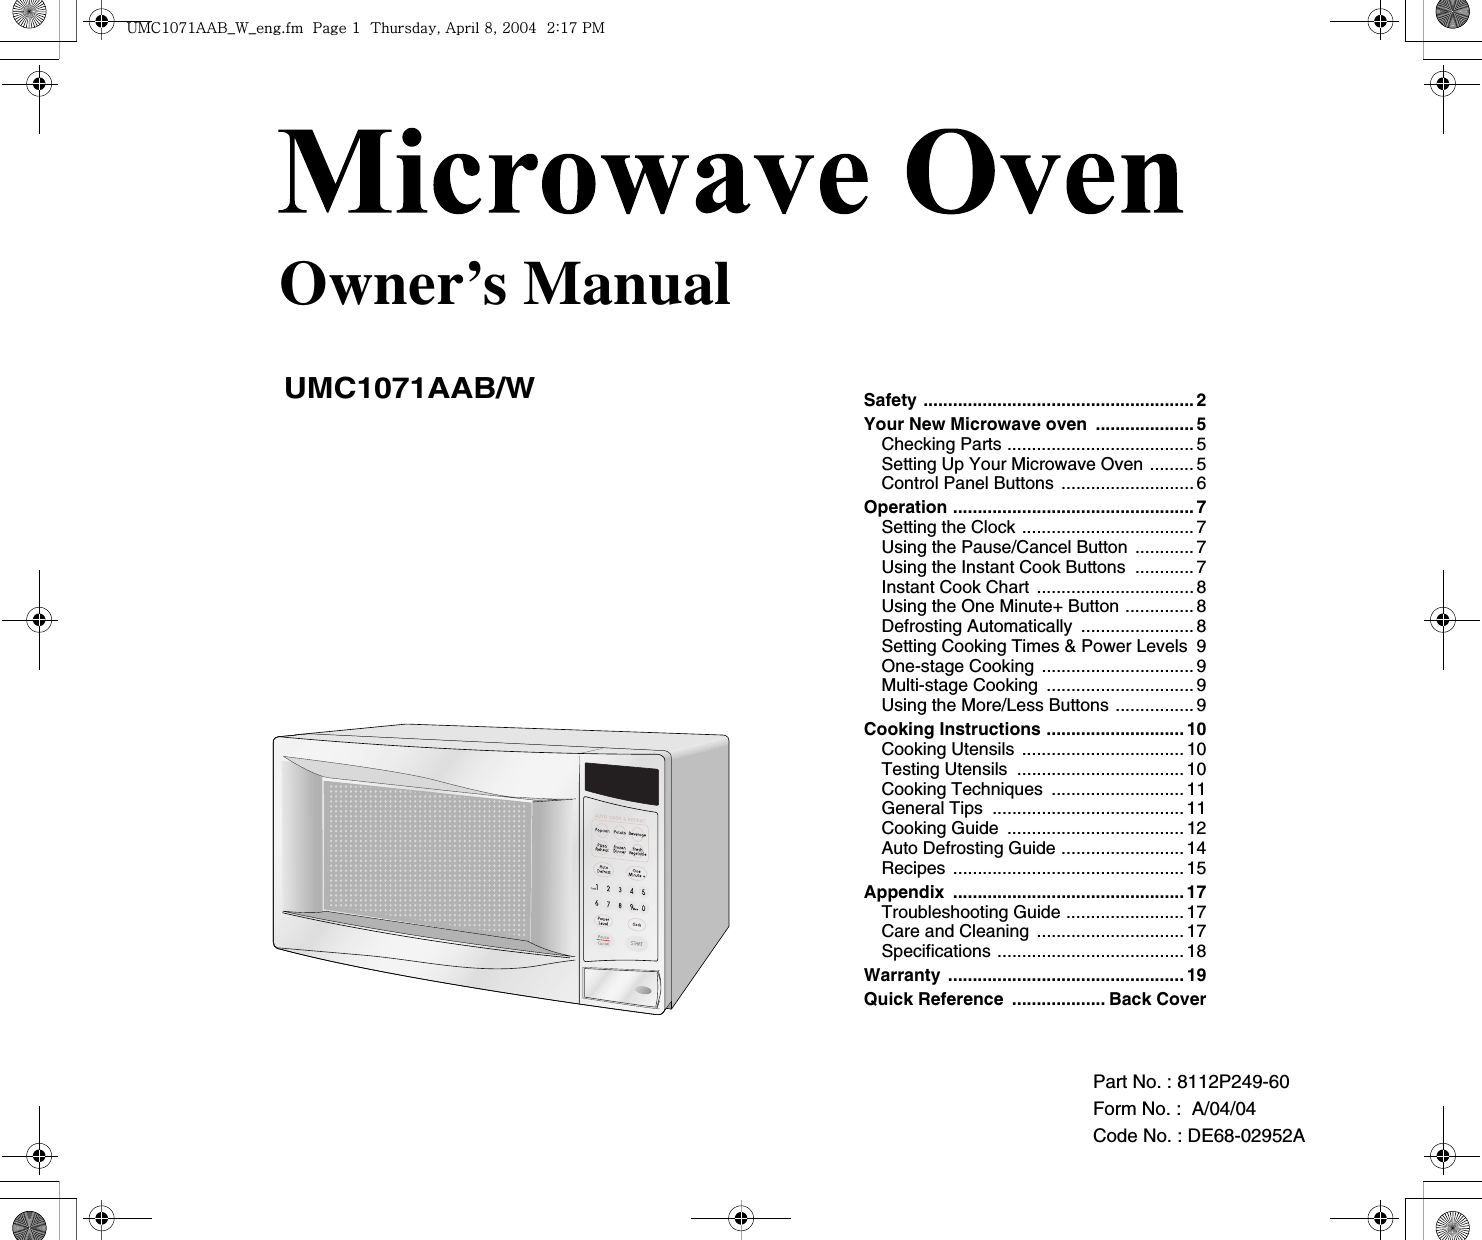 Part No. : 8112P249-60Form No. :  A/04/04Code No. : DE68-02952A Owner’s ManualUMC1071AAB/WSafety .......................................................2Your New Microwave oven  ....................5Checking Parts ...................................... 5Setting Up Your Microwave Oven ......... 5Control Panel Buttons ...........................6Operation .................................................7Setting the Clock ................................... 7Using the Pause/Cancel Button ............7Using the Instant Cook Buttons  ............7Instant Cook ChartG................................8Using the One Minute+ Button ..............8Defrosting Automatically .......................8Setting Cooking Times &amp; Power Levels  9One-stage Cooking ...............................9Multi-stage Cooking  ..............................9Using the More/Less Buttons ................9Cooking Instructions ............................ 10Cooking Utensils .................................10Testing Utensils  ..................................10Cooking Techniques  ........................... 11General Tips  .......................................11Cooking Guide  ....................................12Auto Defrosting Guide .........................14Recipes ...............................................15Appendix ...............................................17Troubleshooting Guide ........................17Care and Cleaning ..............................17Specifications ......................................18Warranty ................................................19Quick Reference  ................... Back Cover|tjXW^Xhhi~UGGwGXGG{SGhG_SGYWW[GGYaX^Gwt